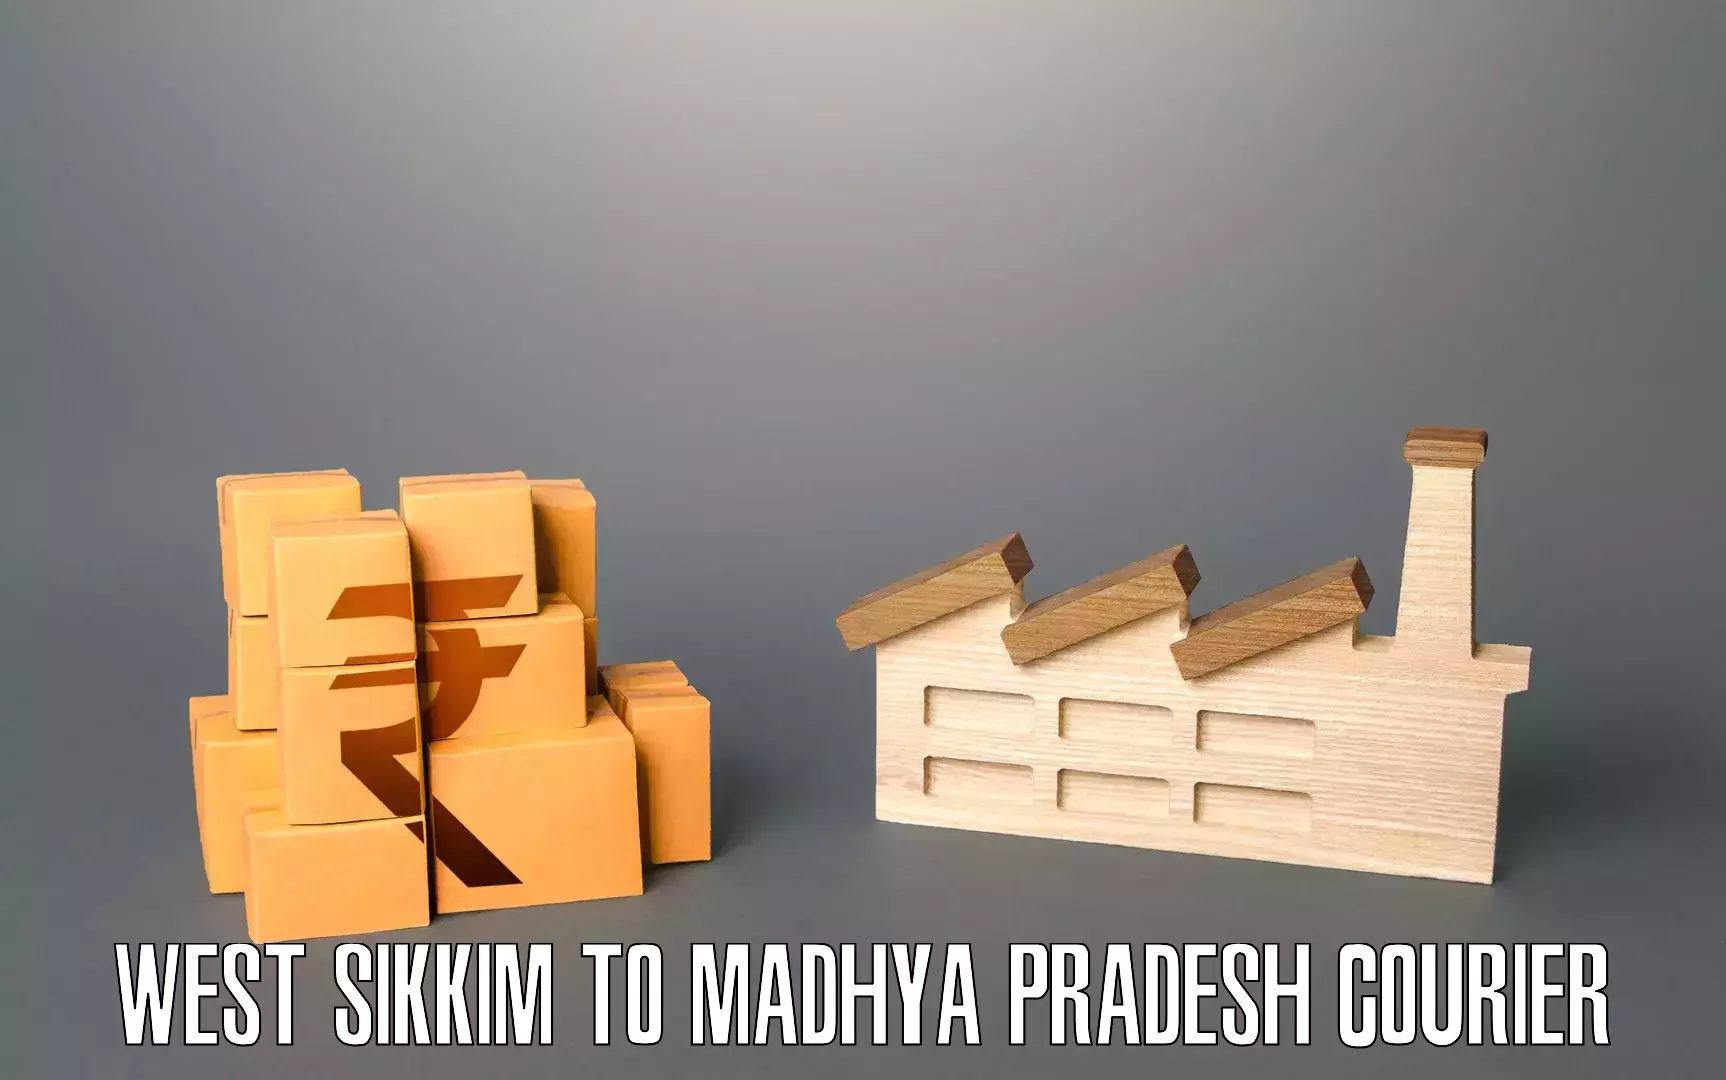 Trusted moving company West Sikkim to Udaipura